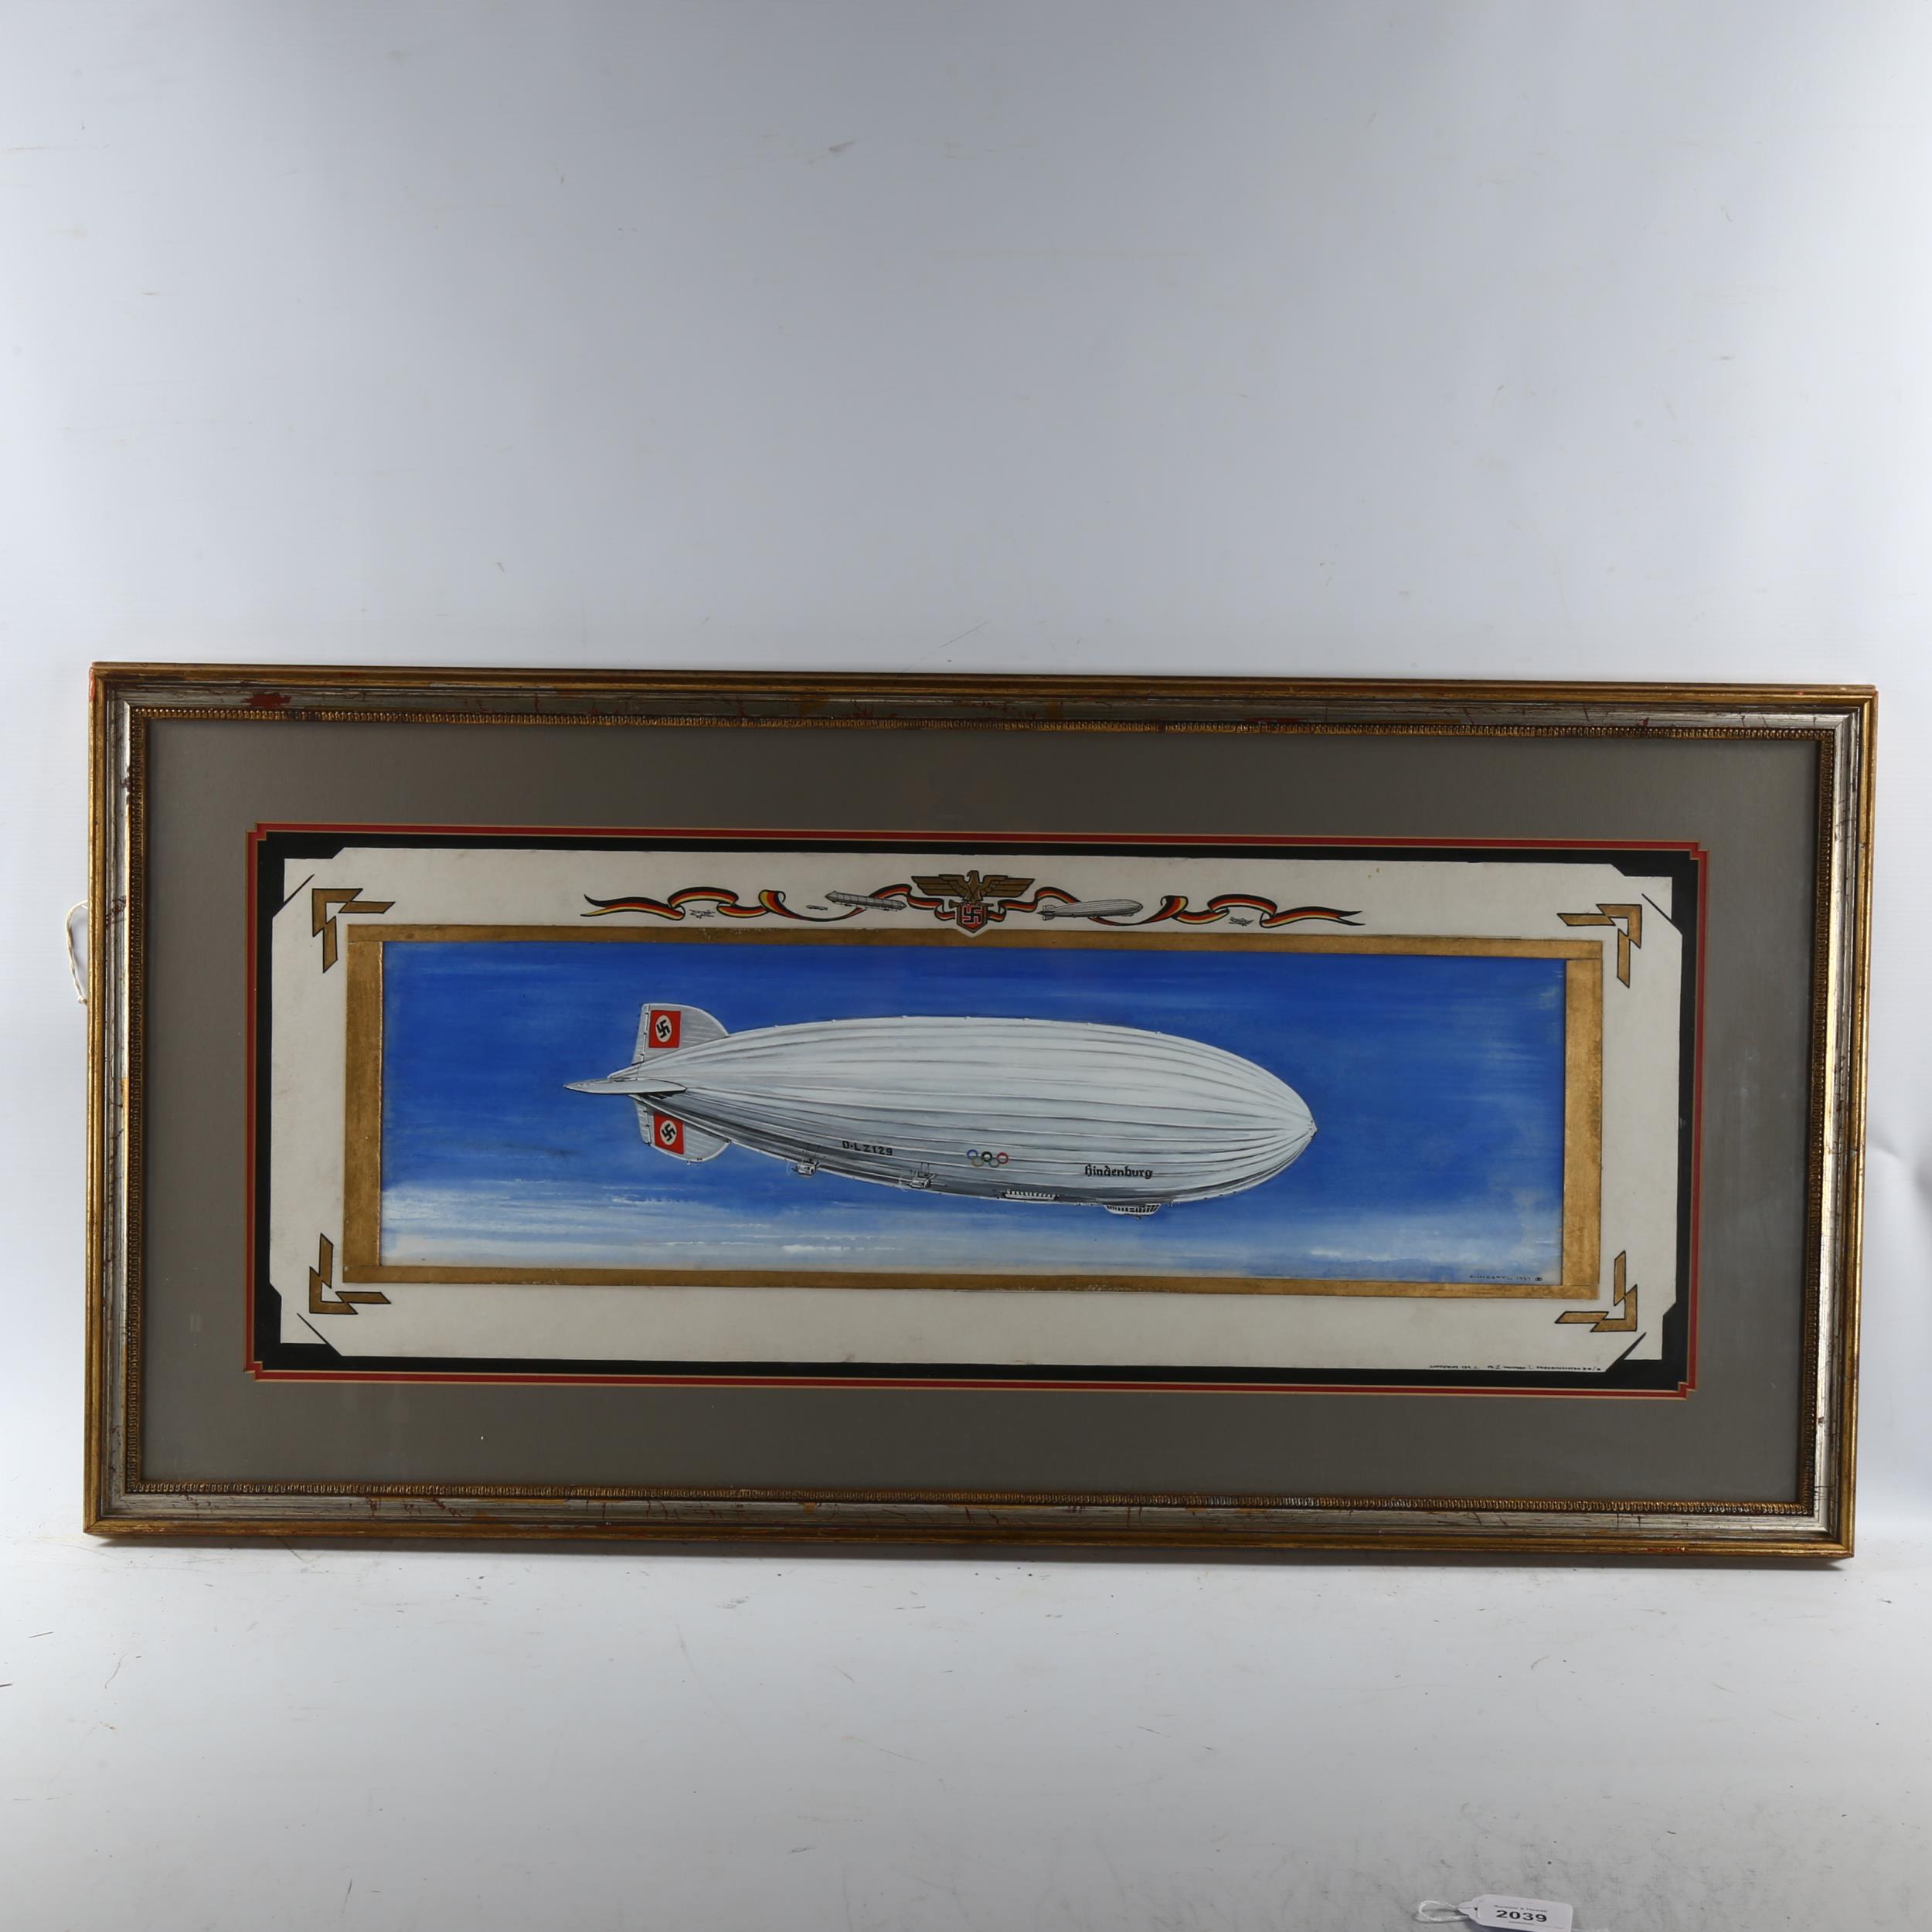 M Hassel, watercolour/gouache, the airship Hindenburg, painted in Olympic livery, signed and dated